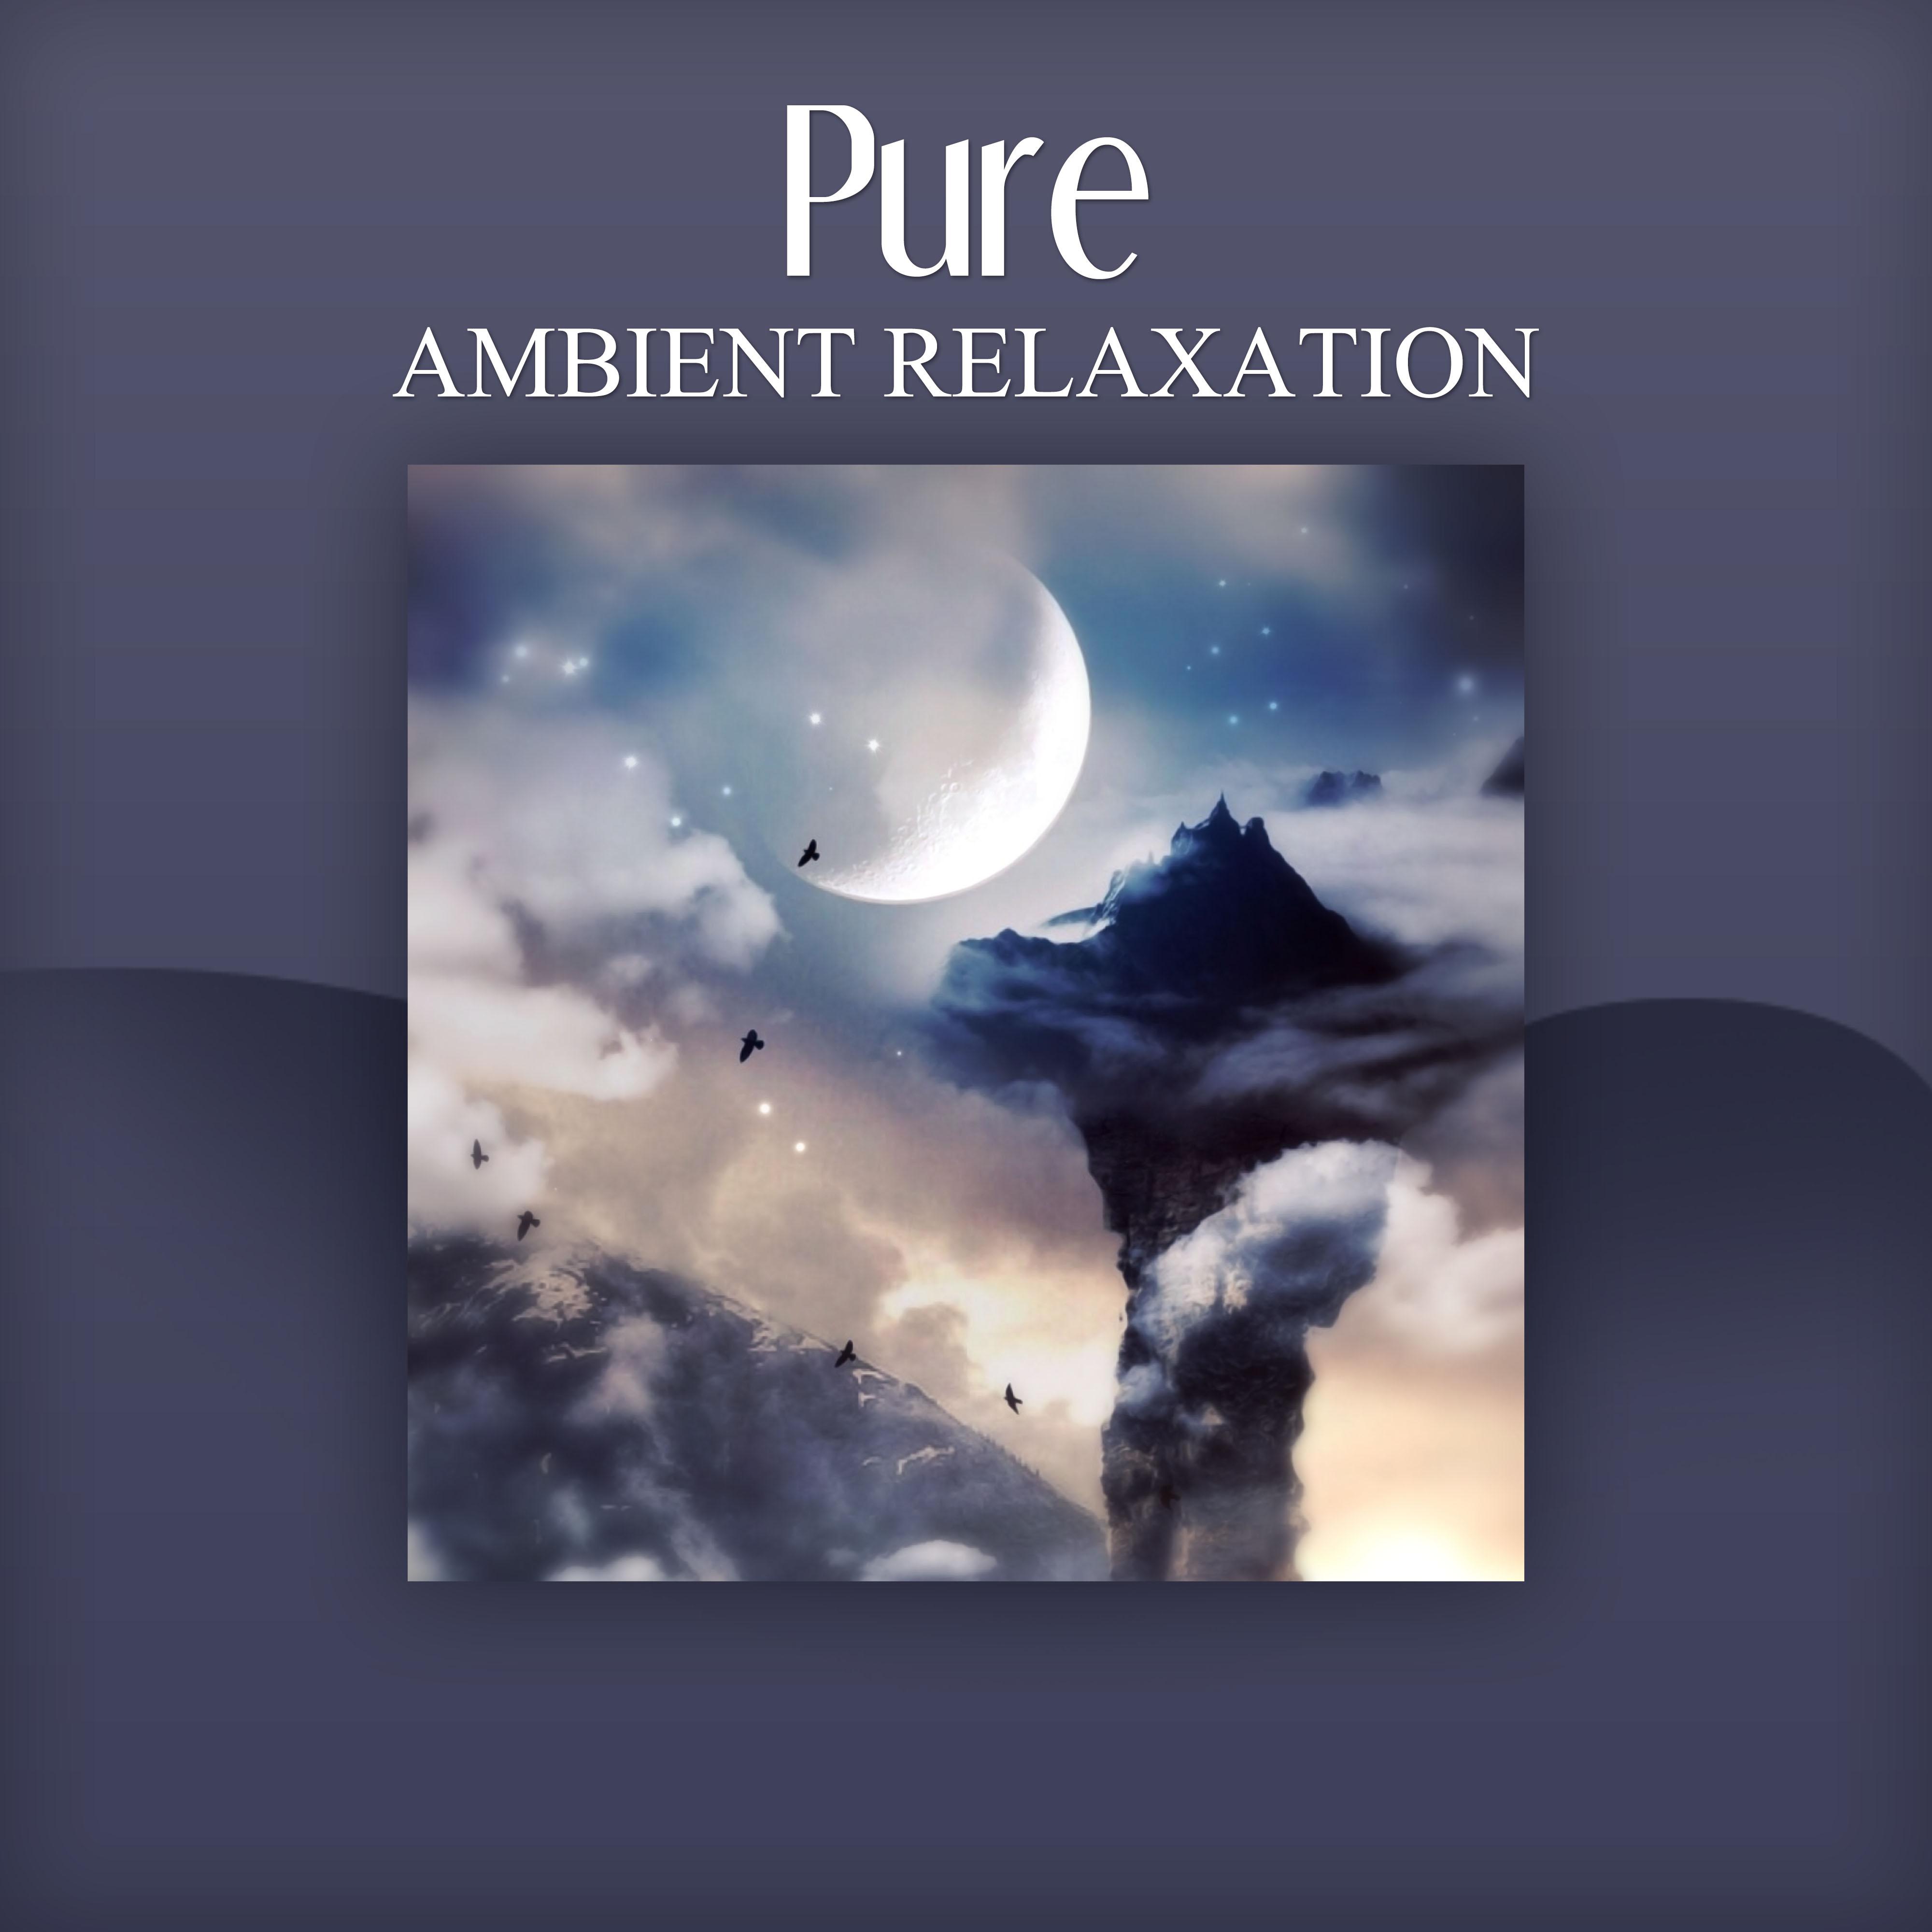 Pure Ambient Relaxation  Relaxing Sleep, Nature Sounds, Dreaming, Sleep Music